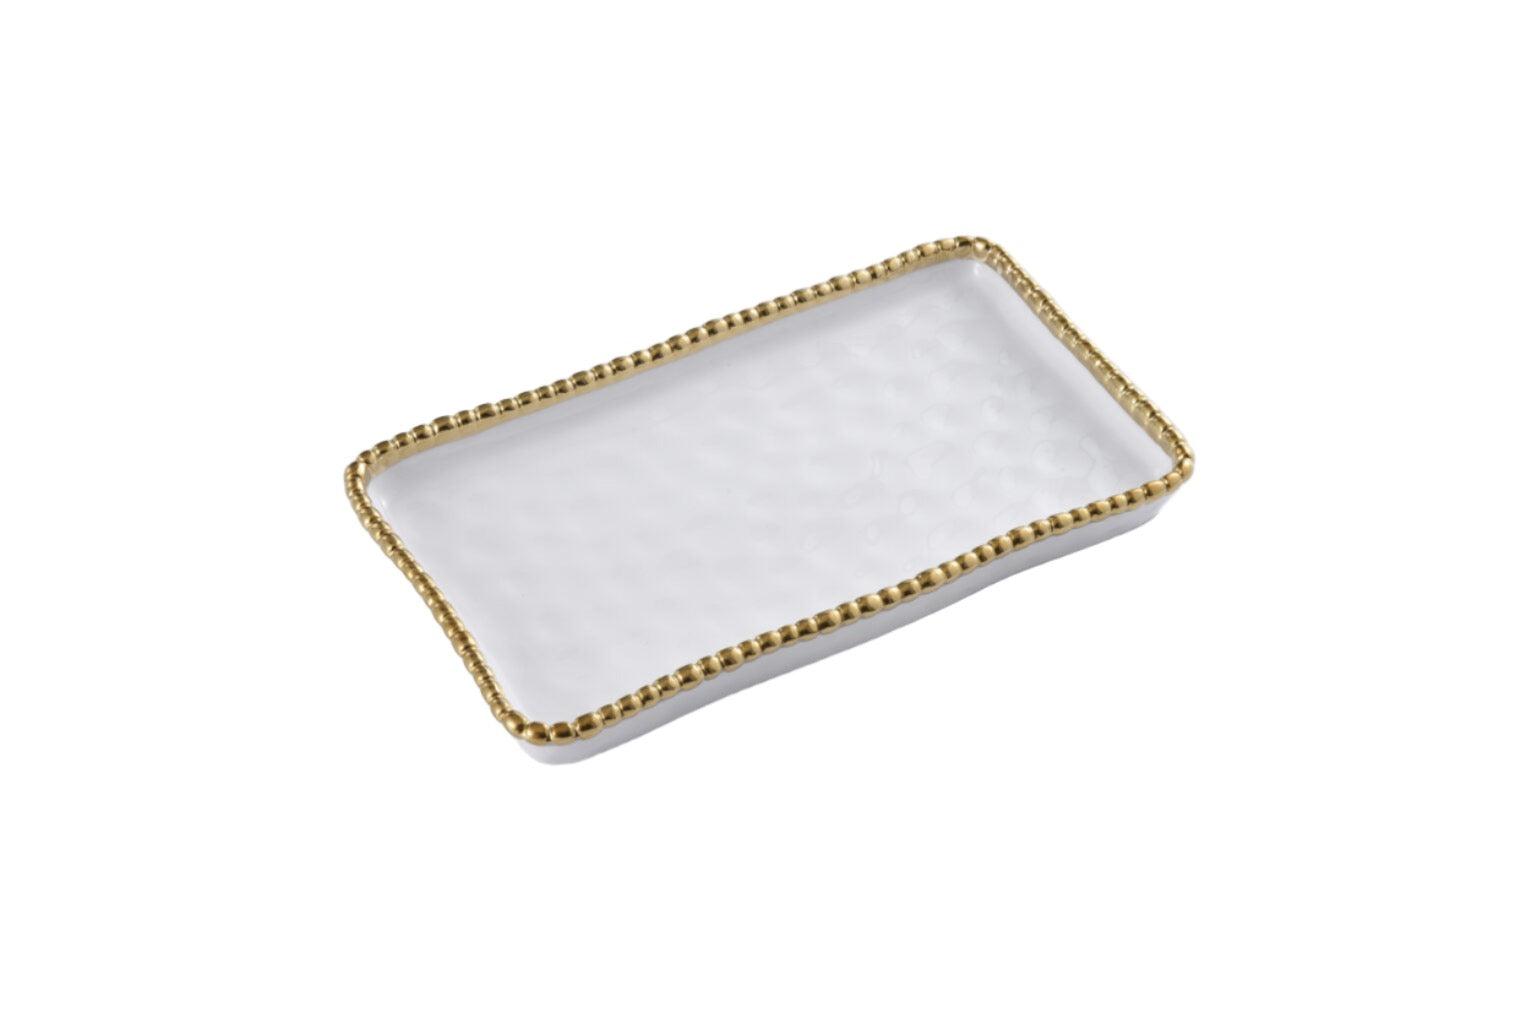 Pampa Bay Rectangular Vanity Tray With Gold Beads